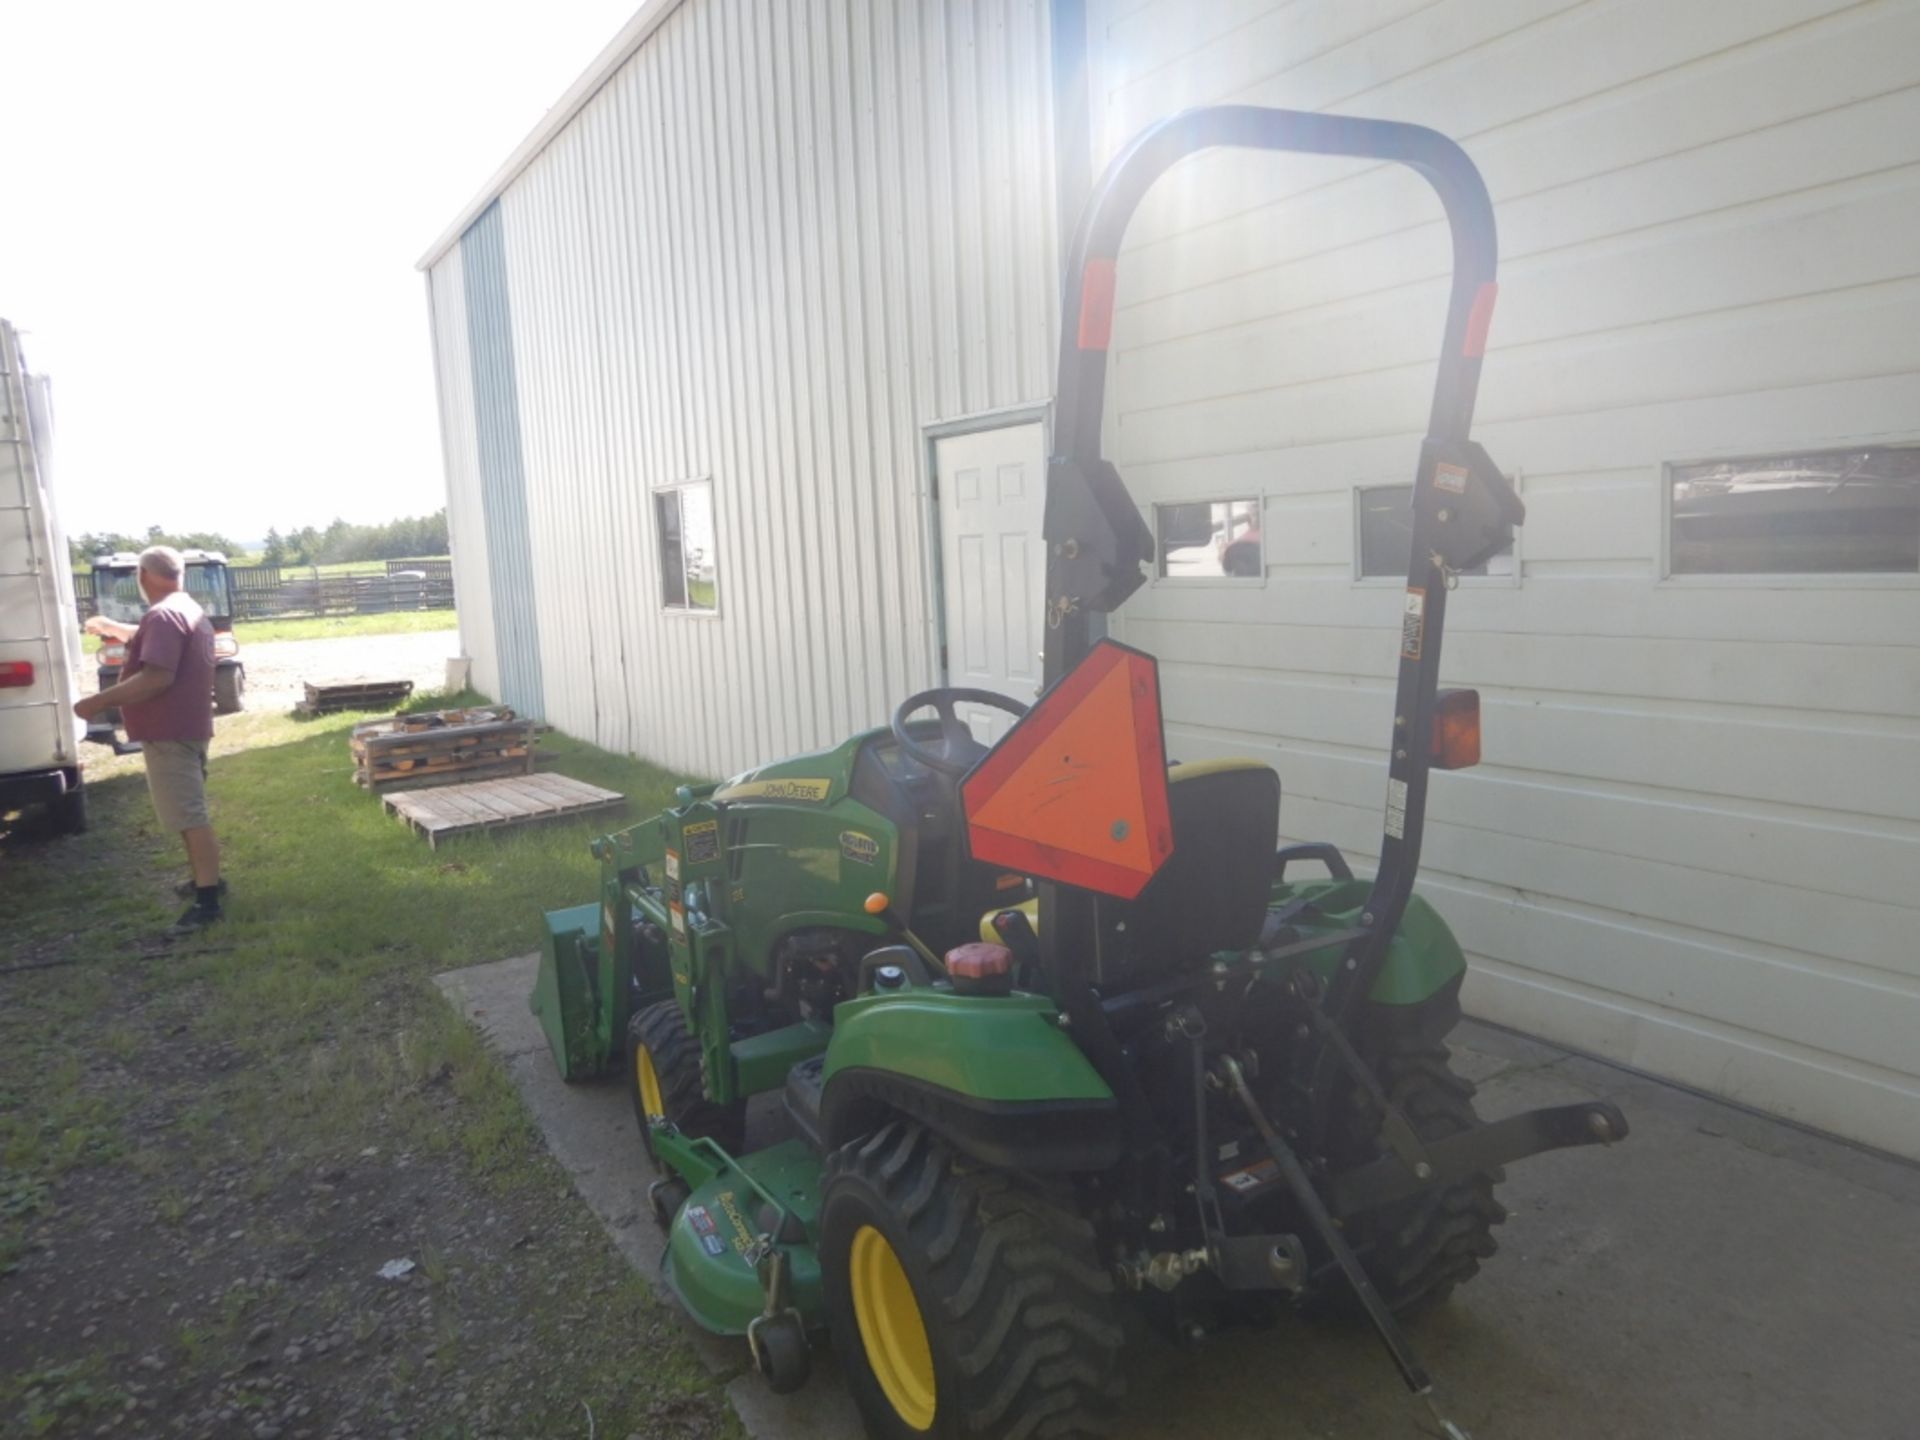 2012 JOHN DEERE 1023E 4WD COMPACT TRACTOR W/ FRONT END LOADER, 3 HYDRAULICS, DELUXE HOOD GUARD, - Image 4 of 11